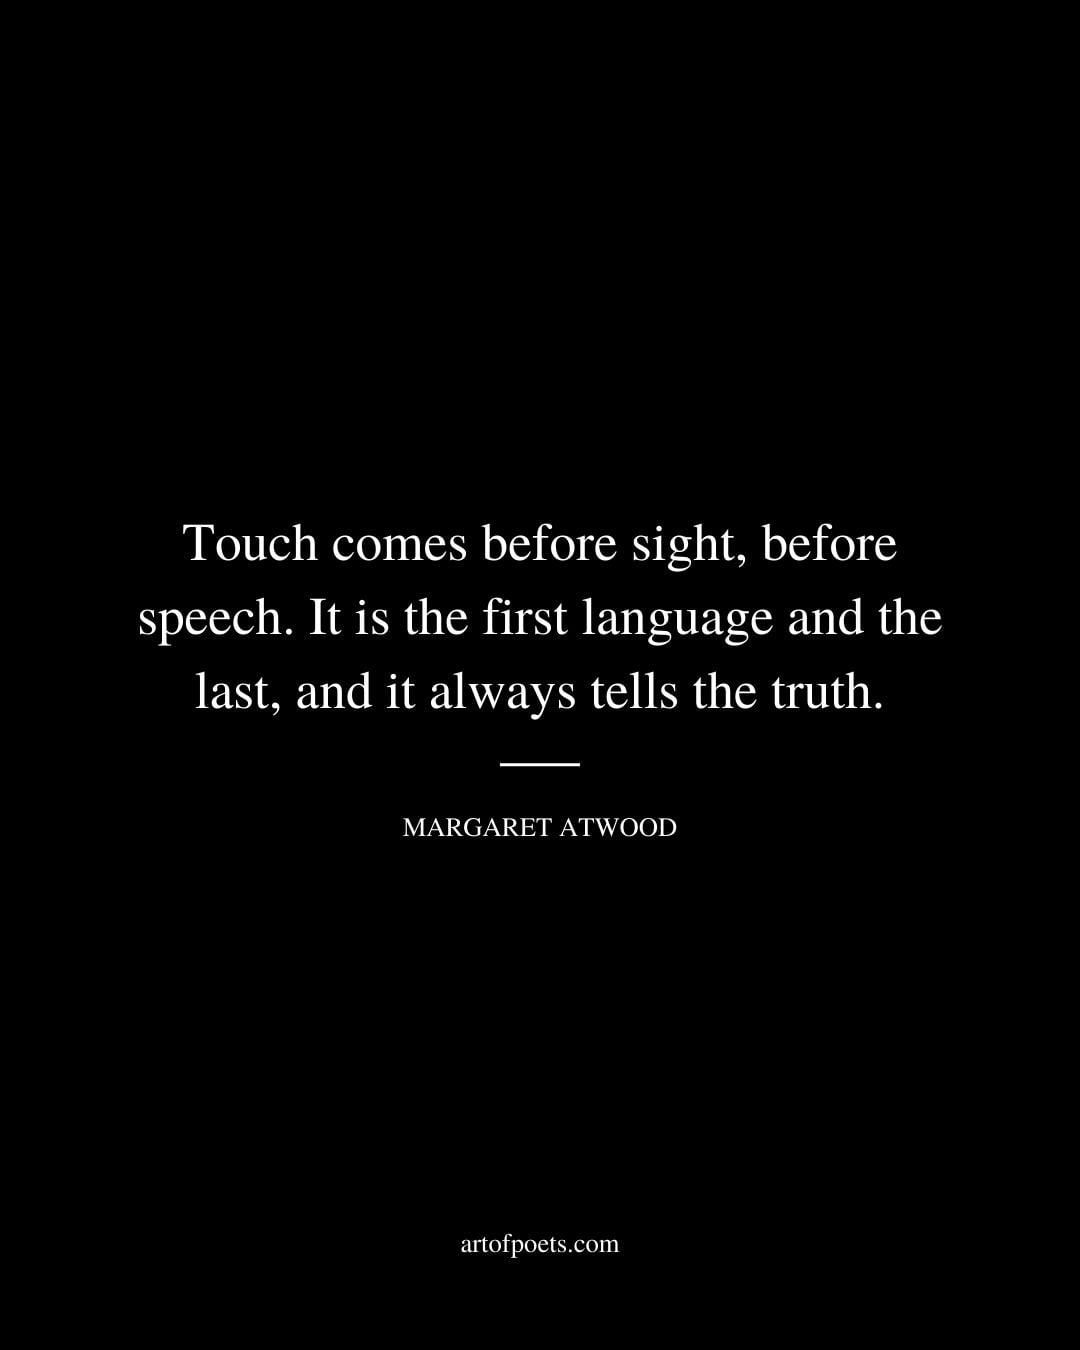 Touch comes before sight before speech. It is the first language and the last and it always tells the truth